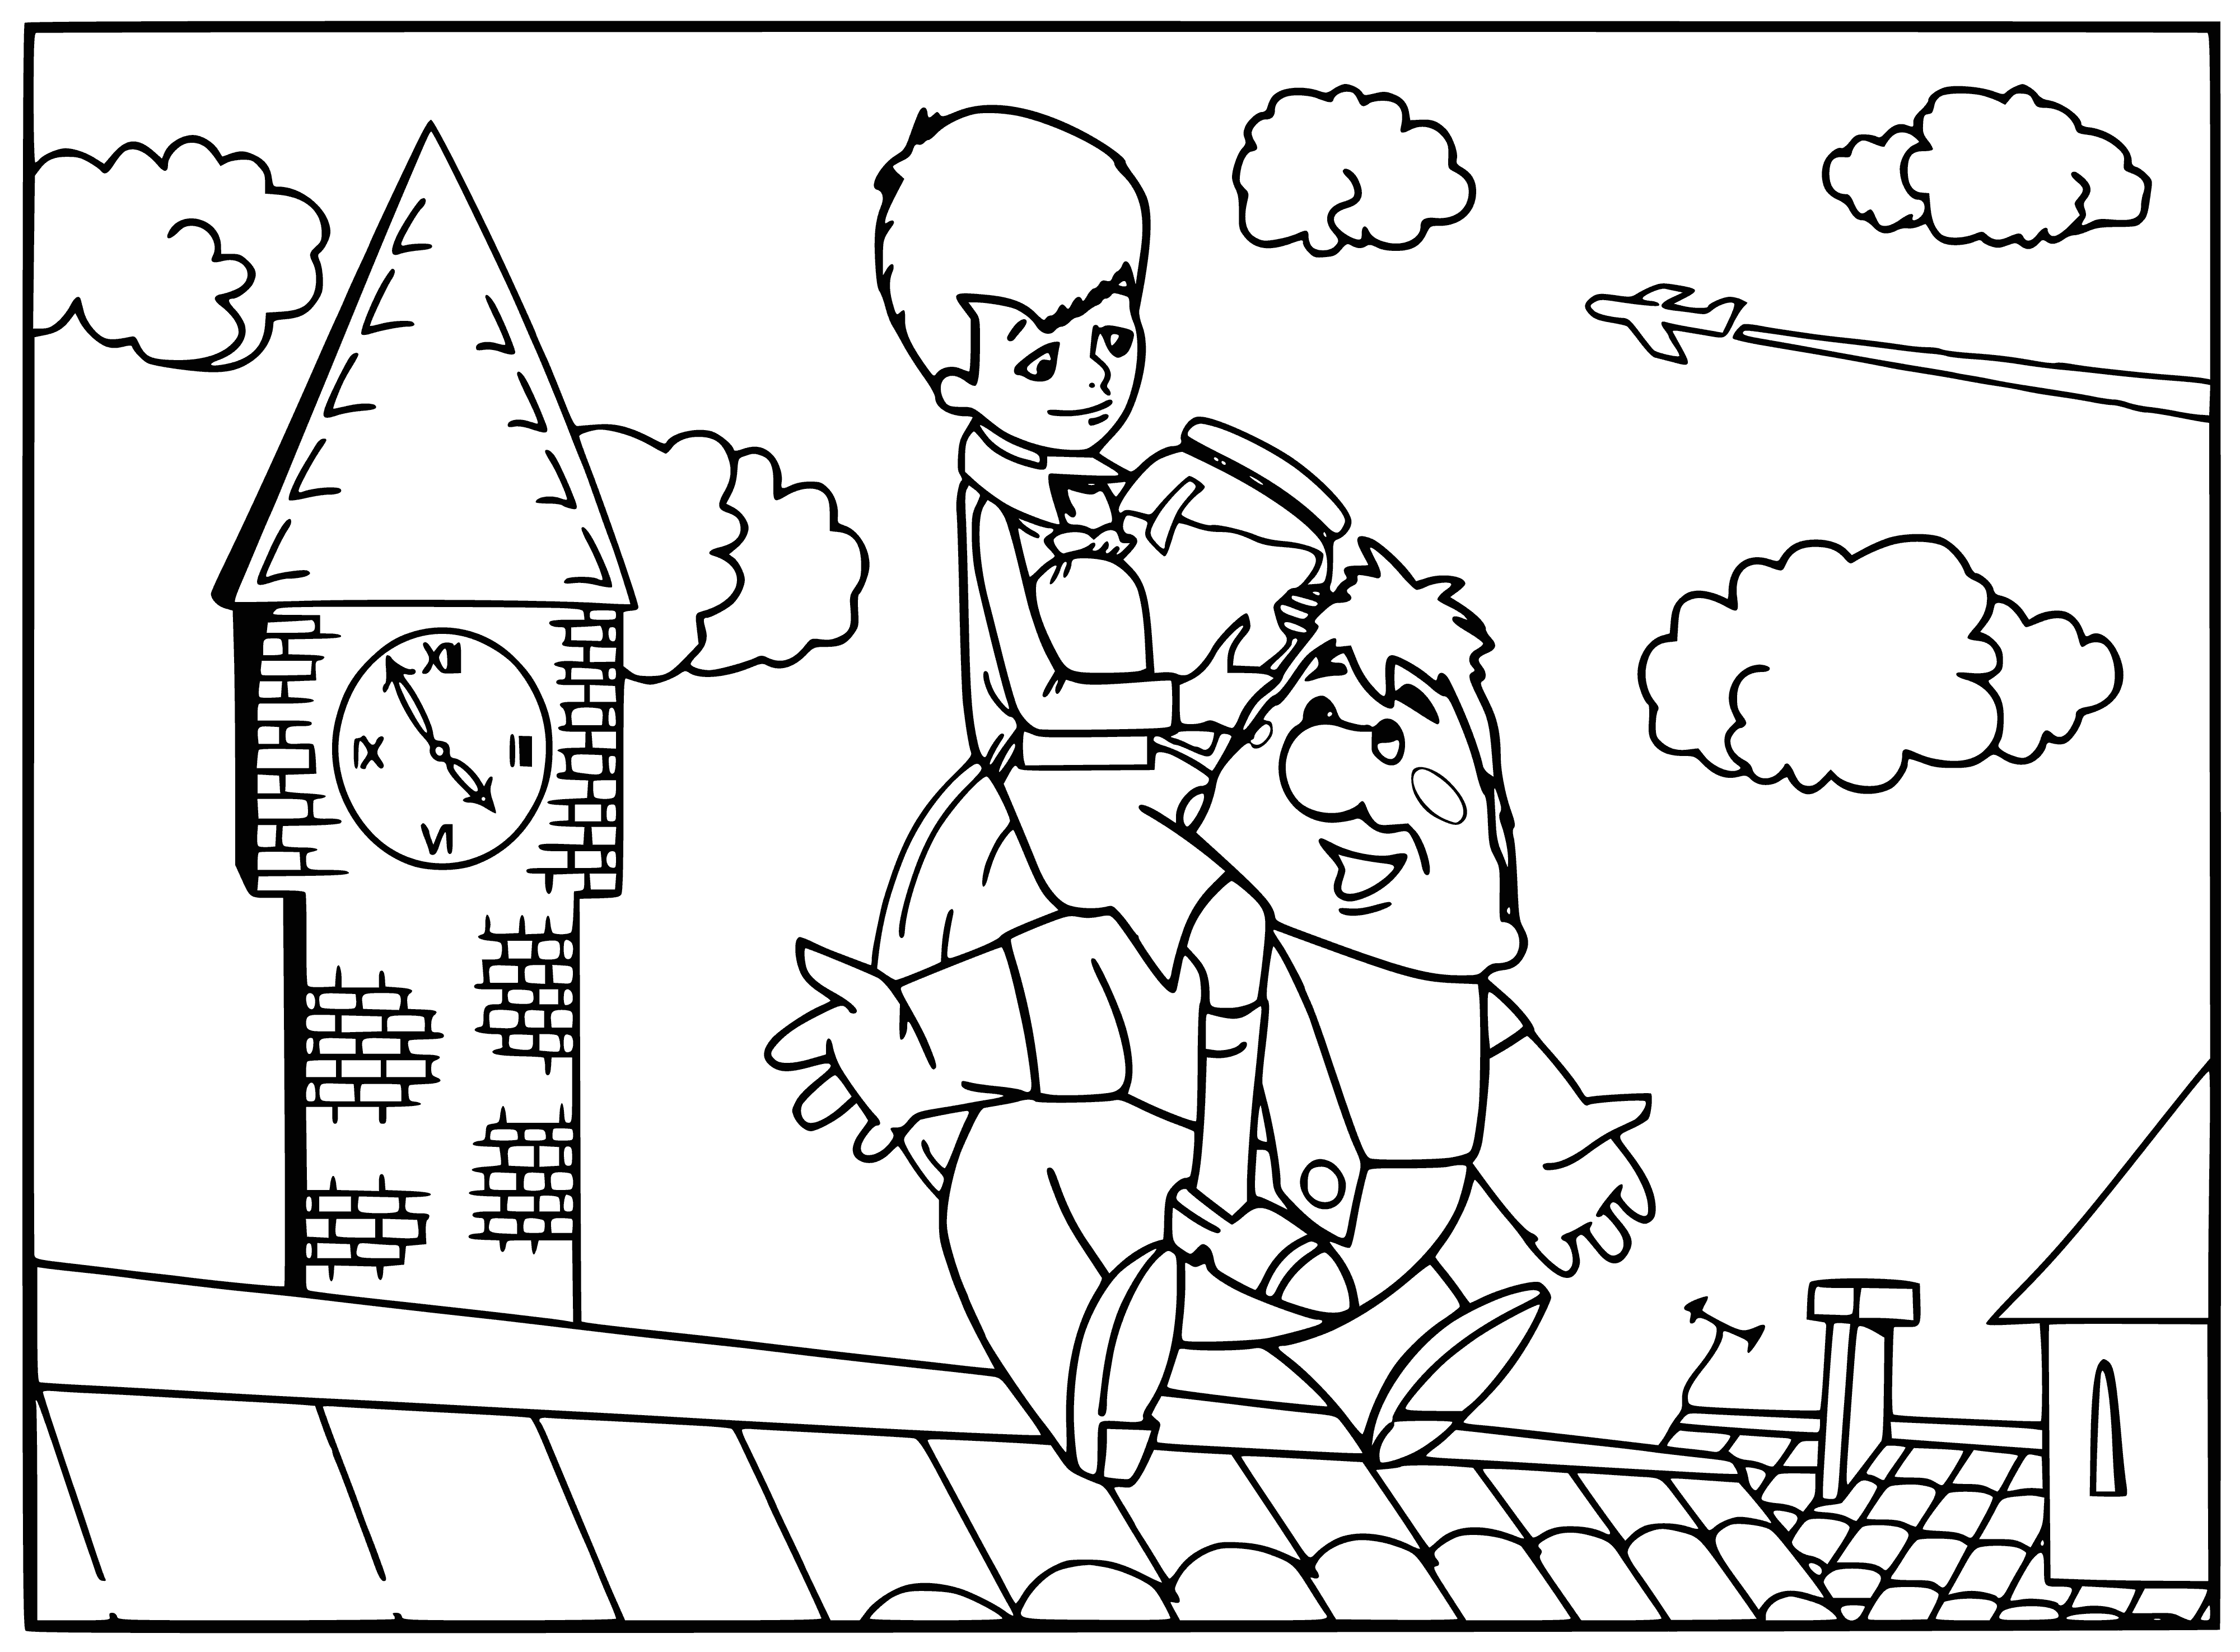 coloring page: Kid and Carlson stand on sidewalk gazing at cityscape, cloudy sky. Kid holds ice cream cone.